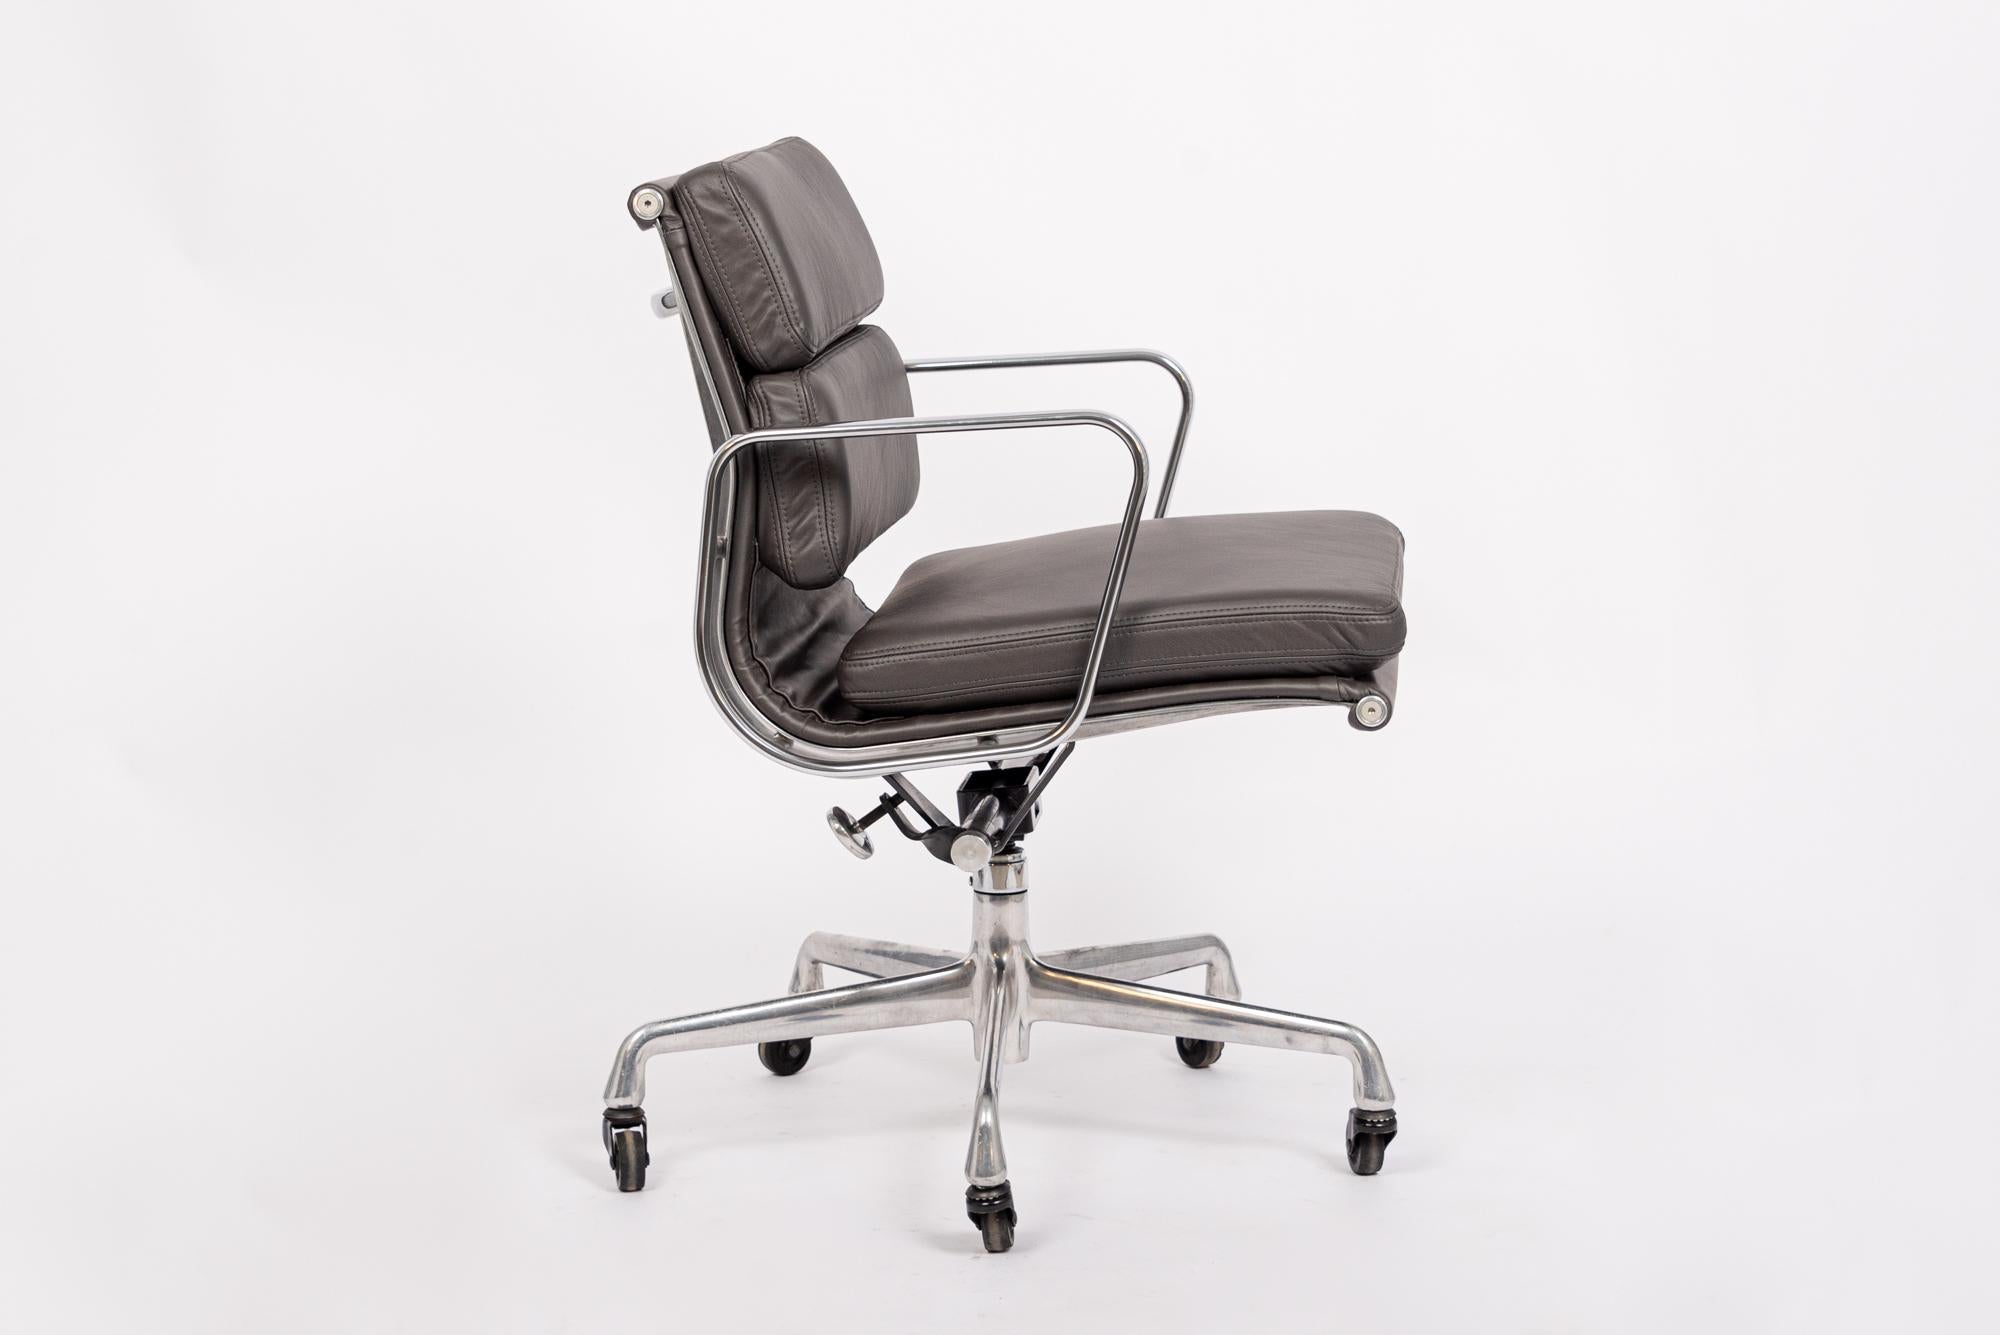 Original Dark Gray Leather Office Chair by Eames for Herman Miller In Good Condition For Sale In Detroit, MI